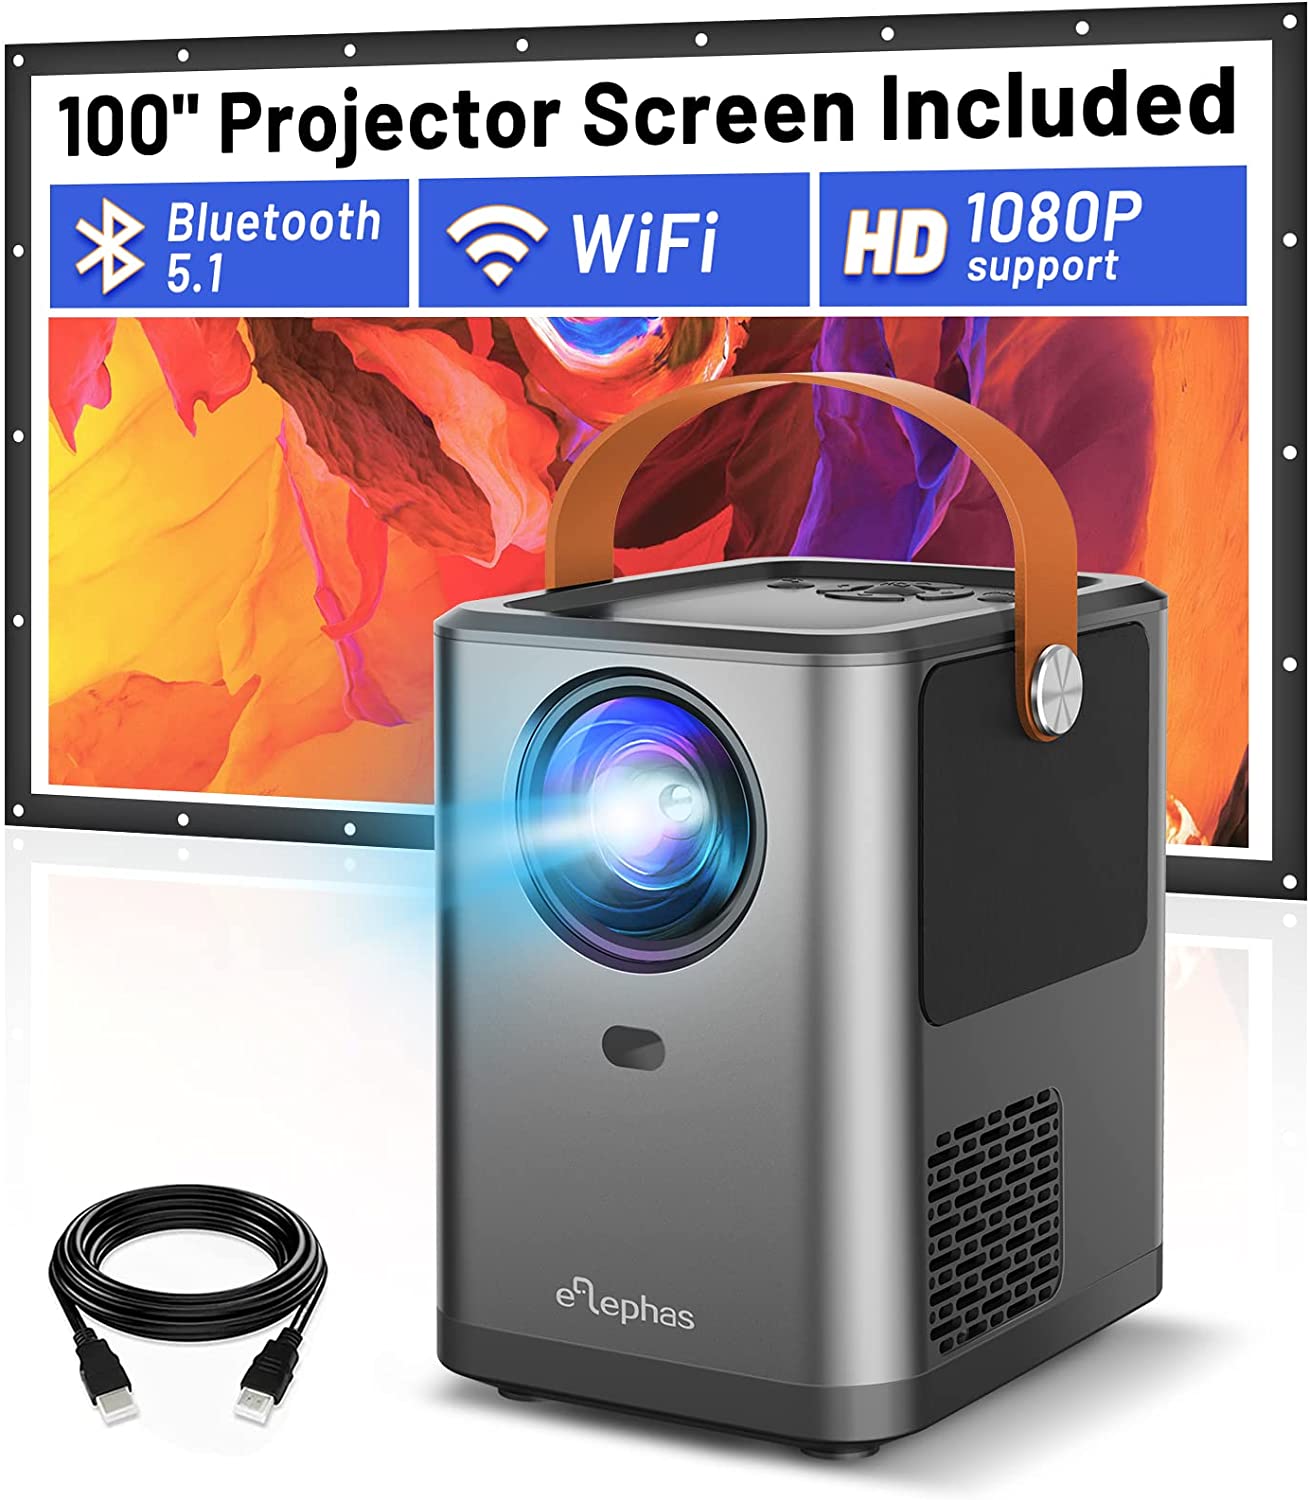 ANDROID-G01 EM ANDROID-G01 PROJECTOR, 1 X HDMI + WIFI INTERFACE